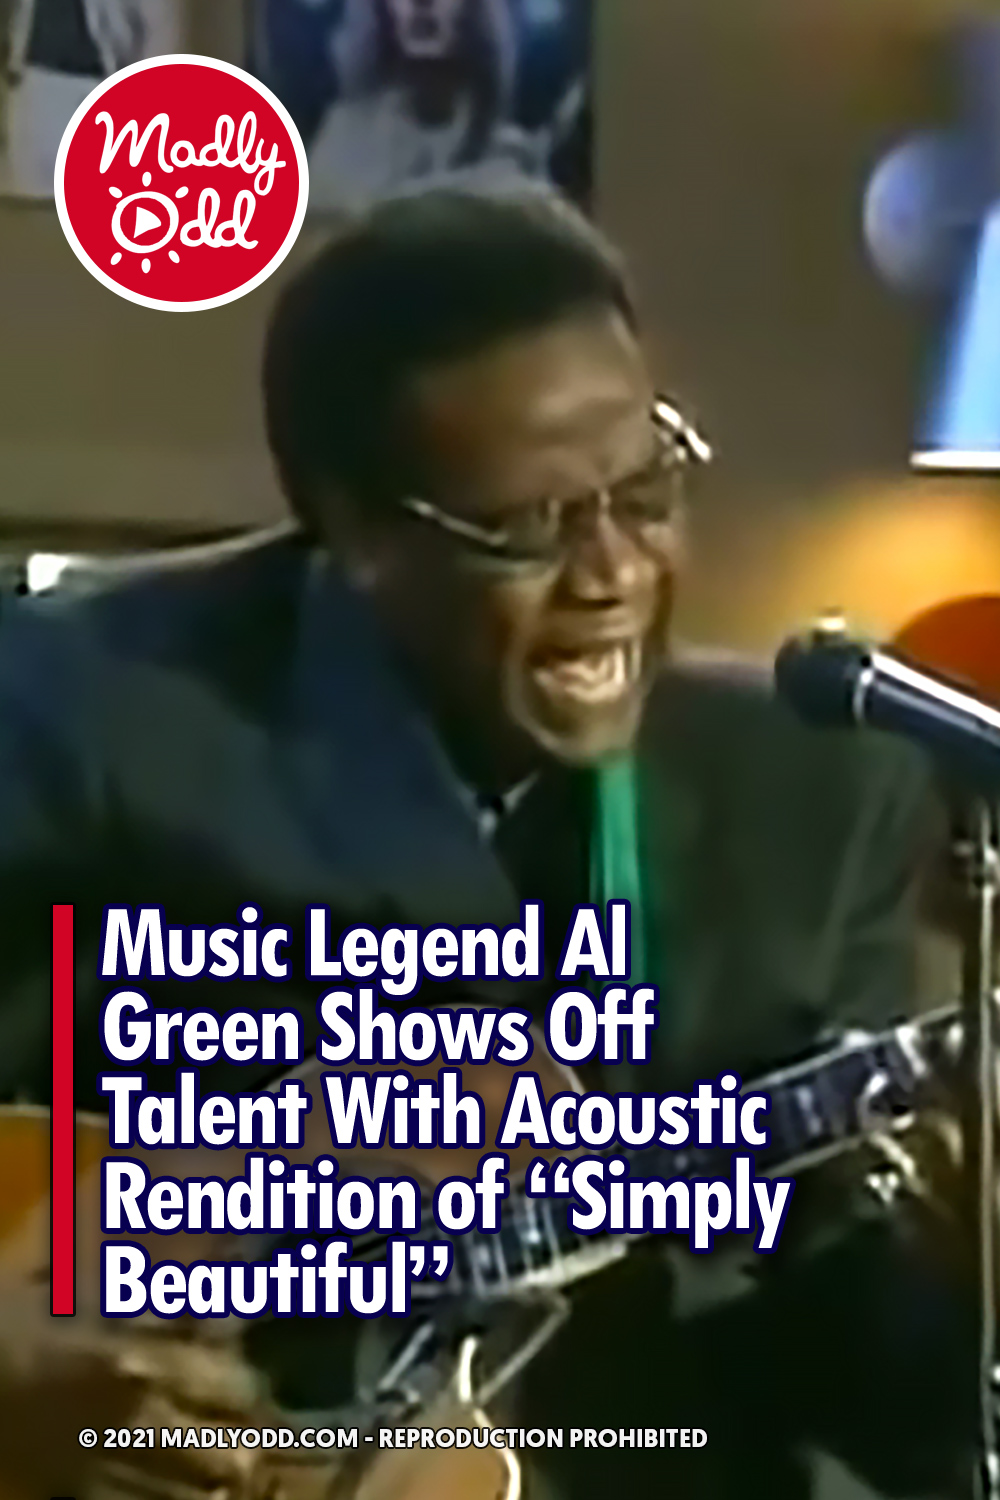 Music Legend Al Green Shows Off Talent With Acoustic Rendition of “Simply Beautiful”